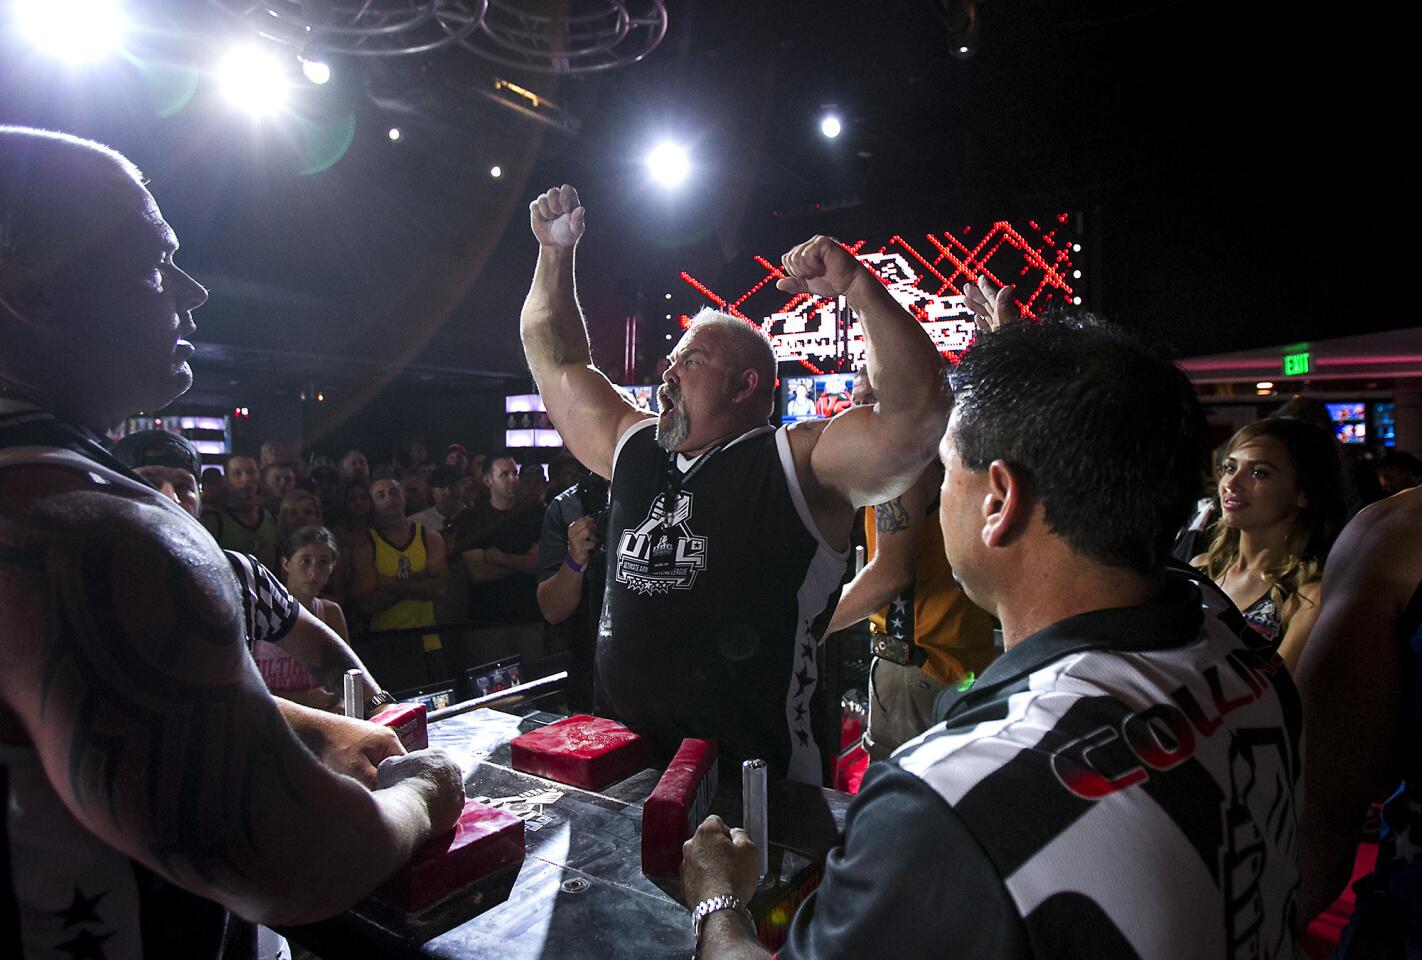 Mike Gould, right, celebrates a win over Matt Girdner in the super heavyweight division during an Ultimate Arm Wrestling League tournament at TEN Nightclub in Newport Beach on Saturday, August 9.